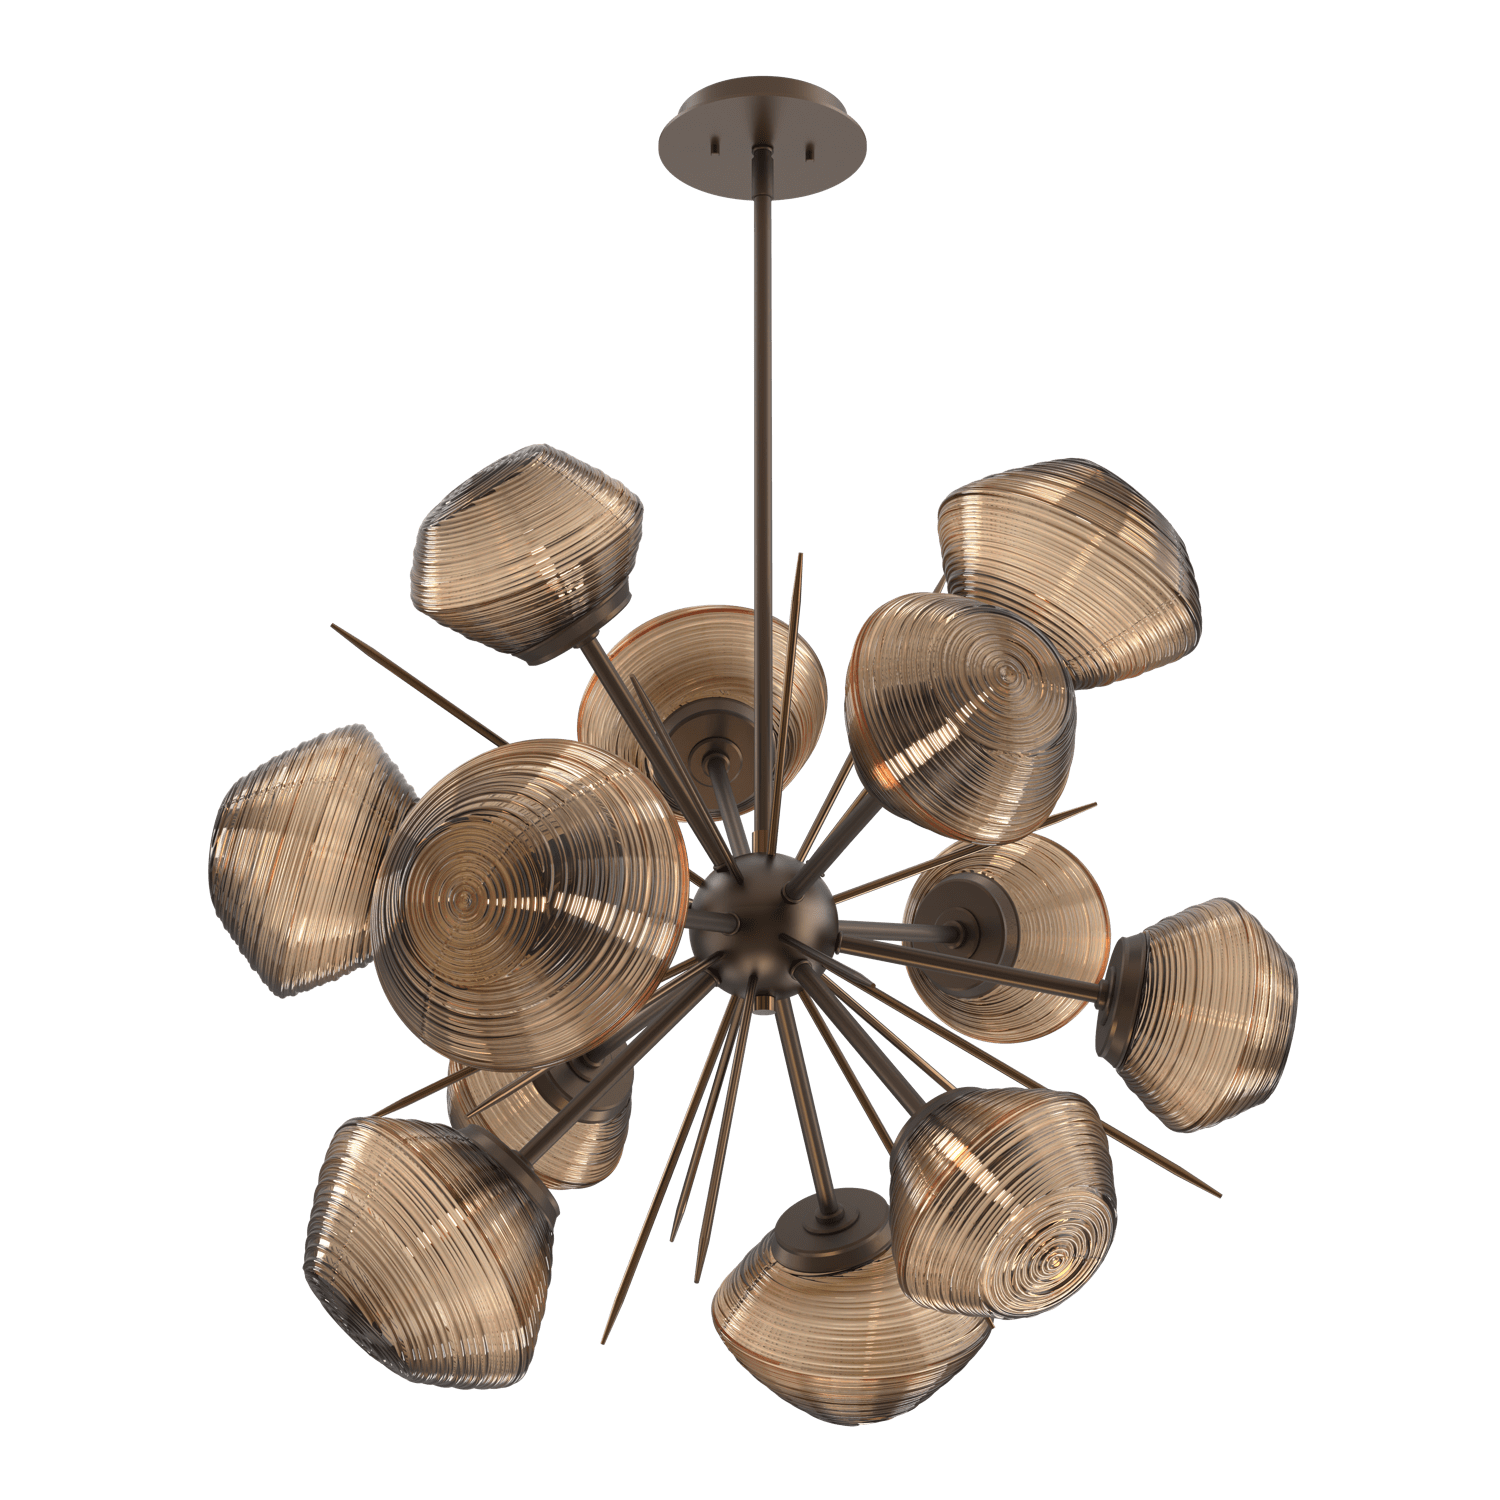 CHB0089-0G-FB-B-Hammerton-Studio-Mesa-36-inch-starburst-chandelier-with-flat-bronze-finish-and-bronze-blown-glass-shades-and-LED-lamping